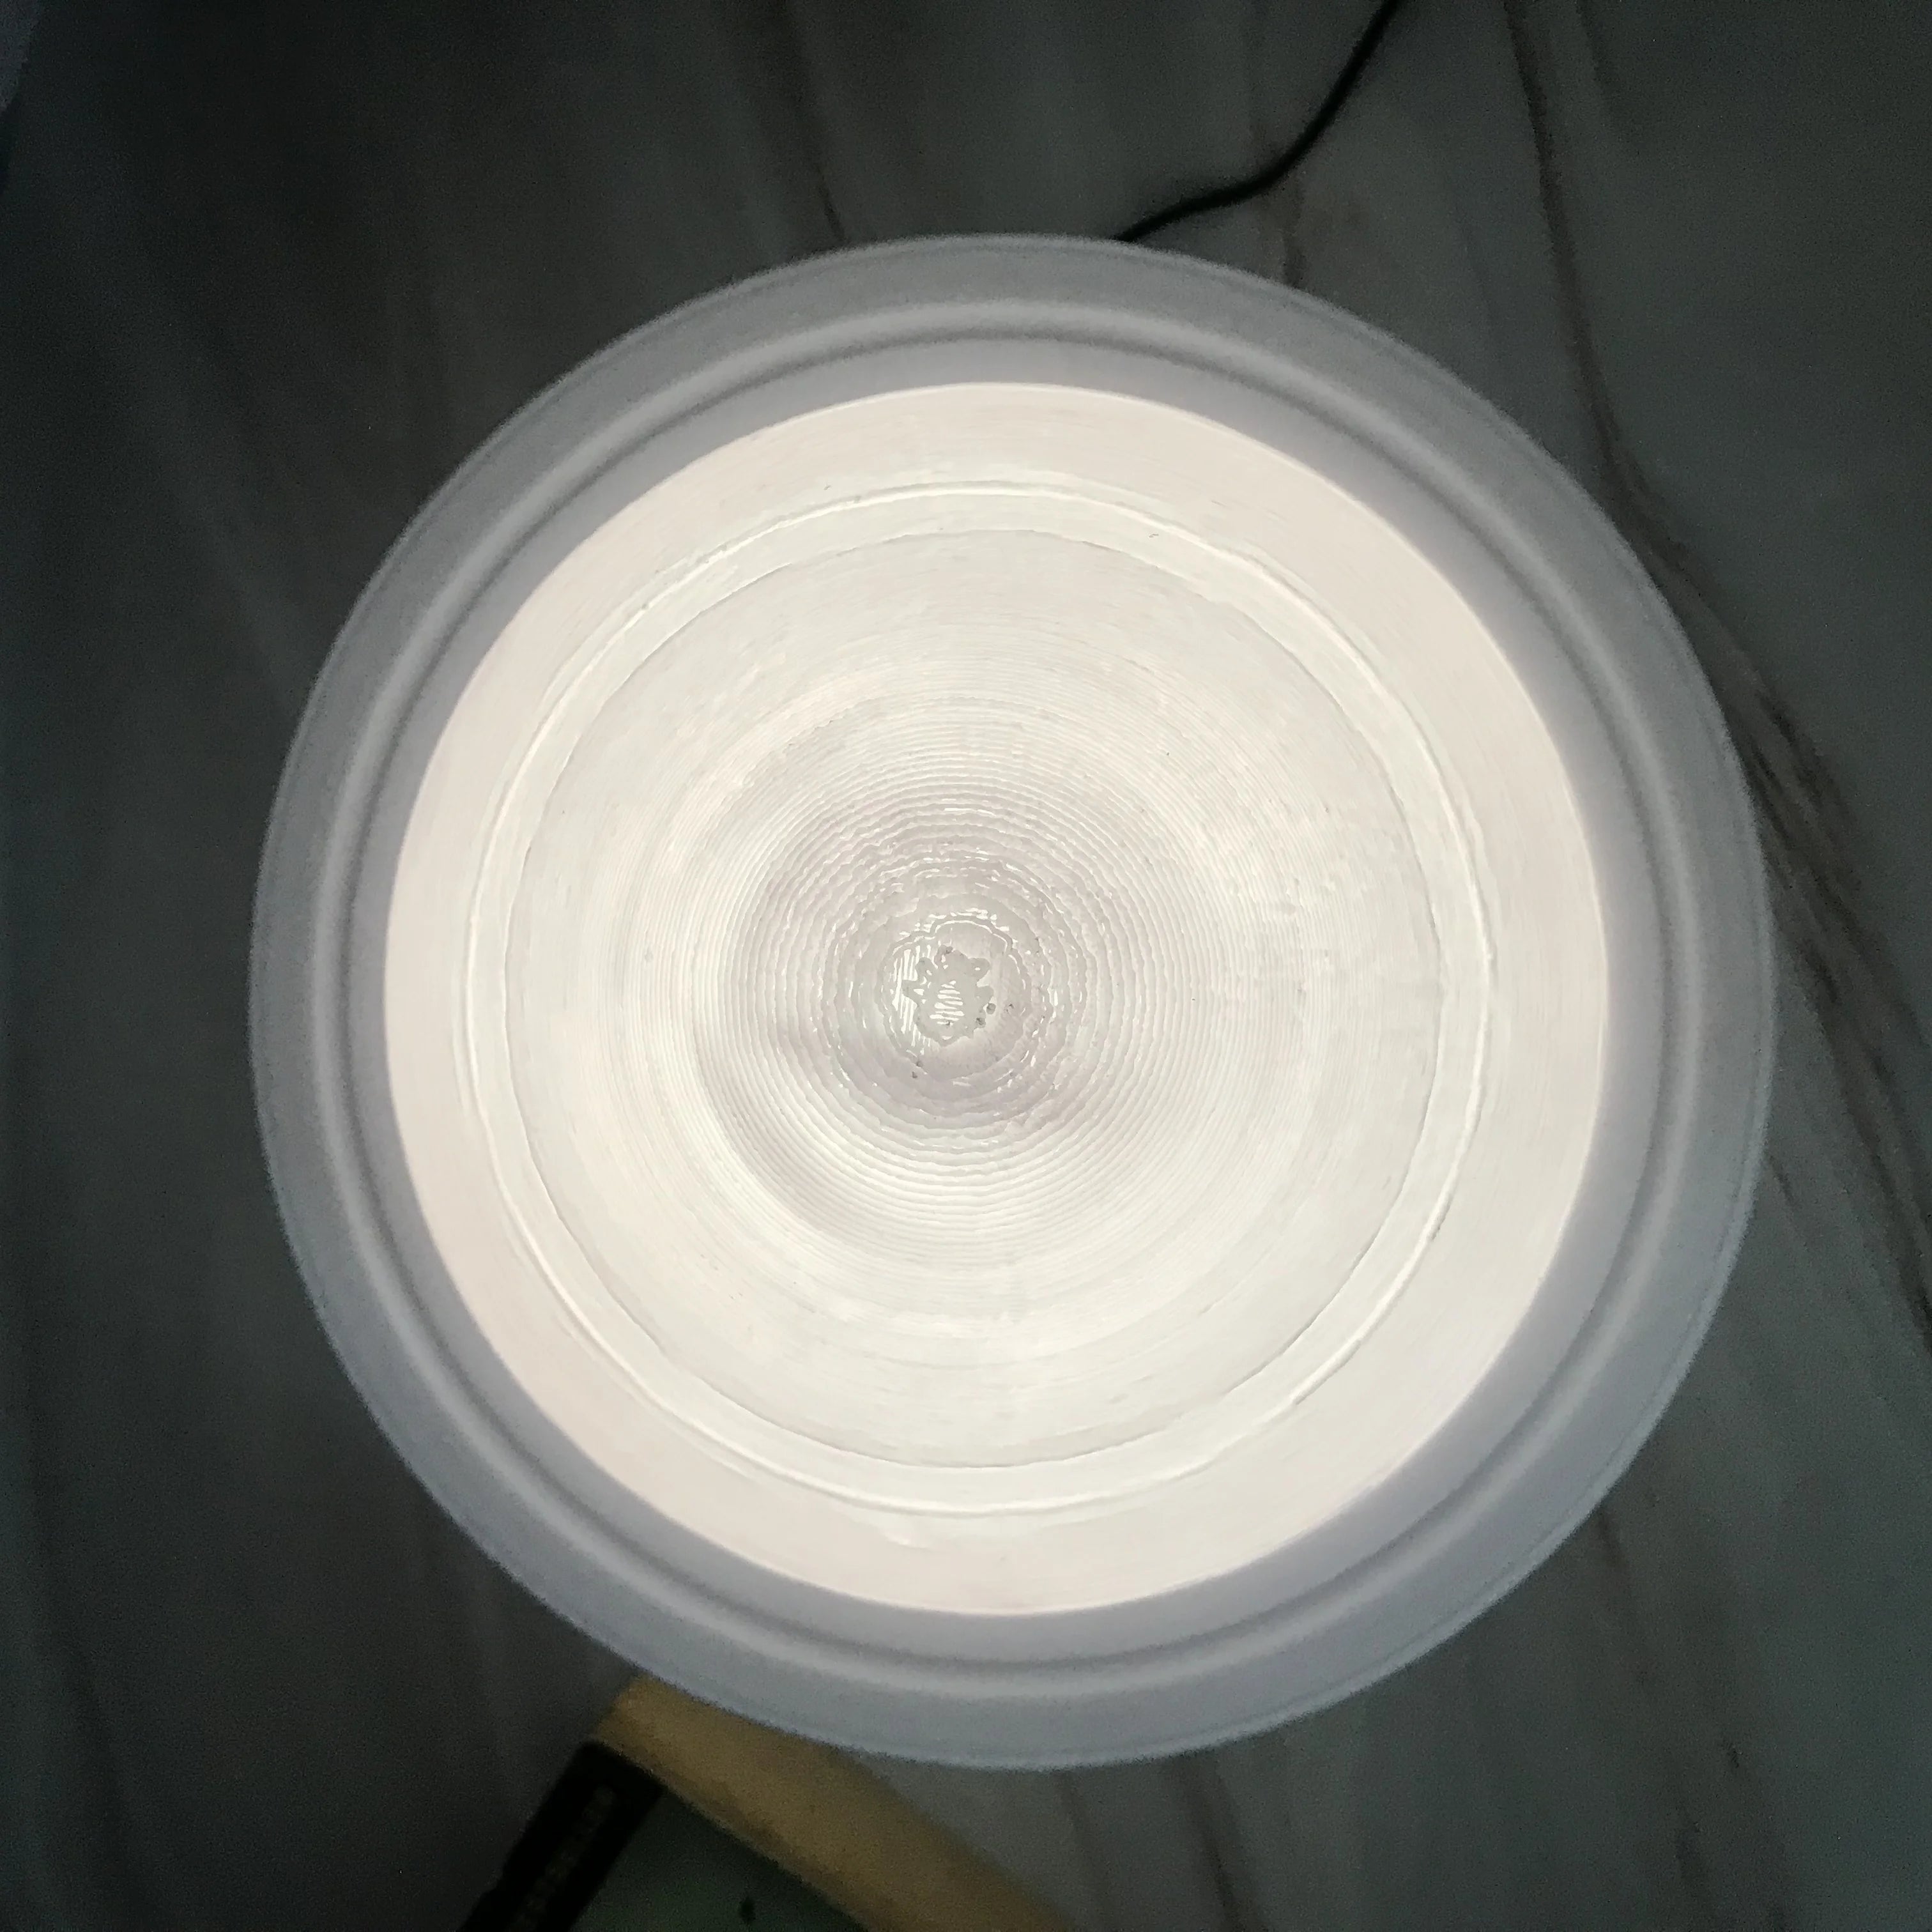 Saturn Lamp illuminated against a starry background